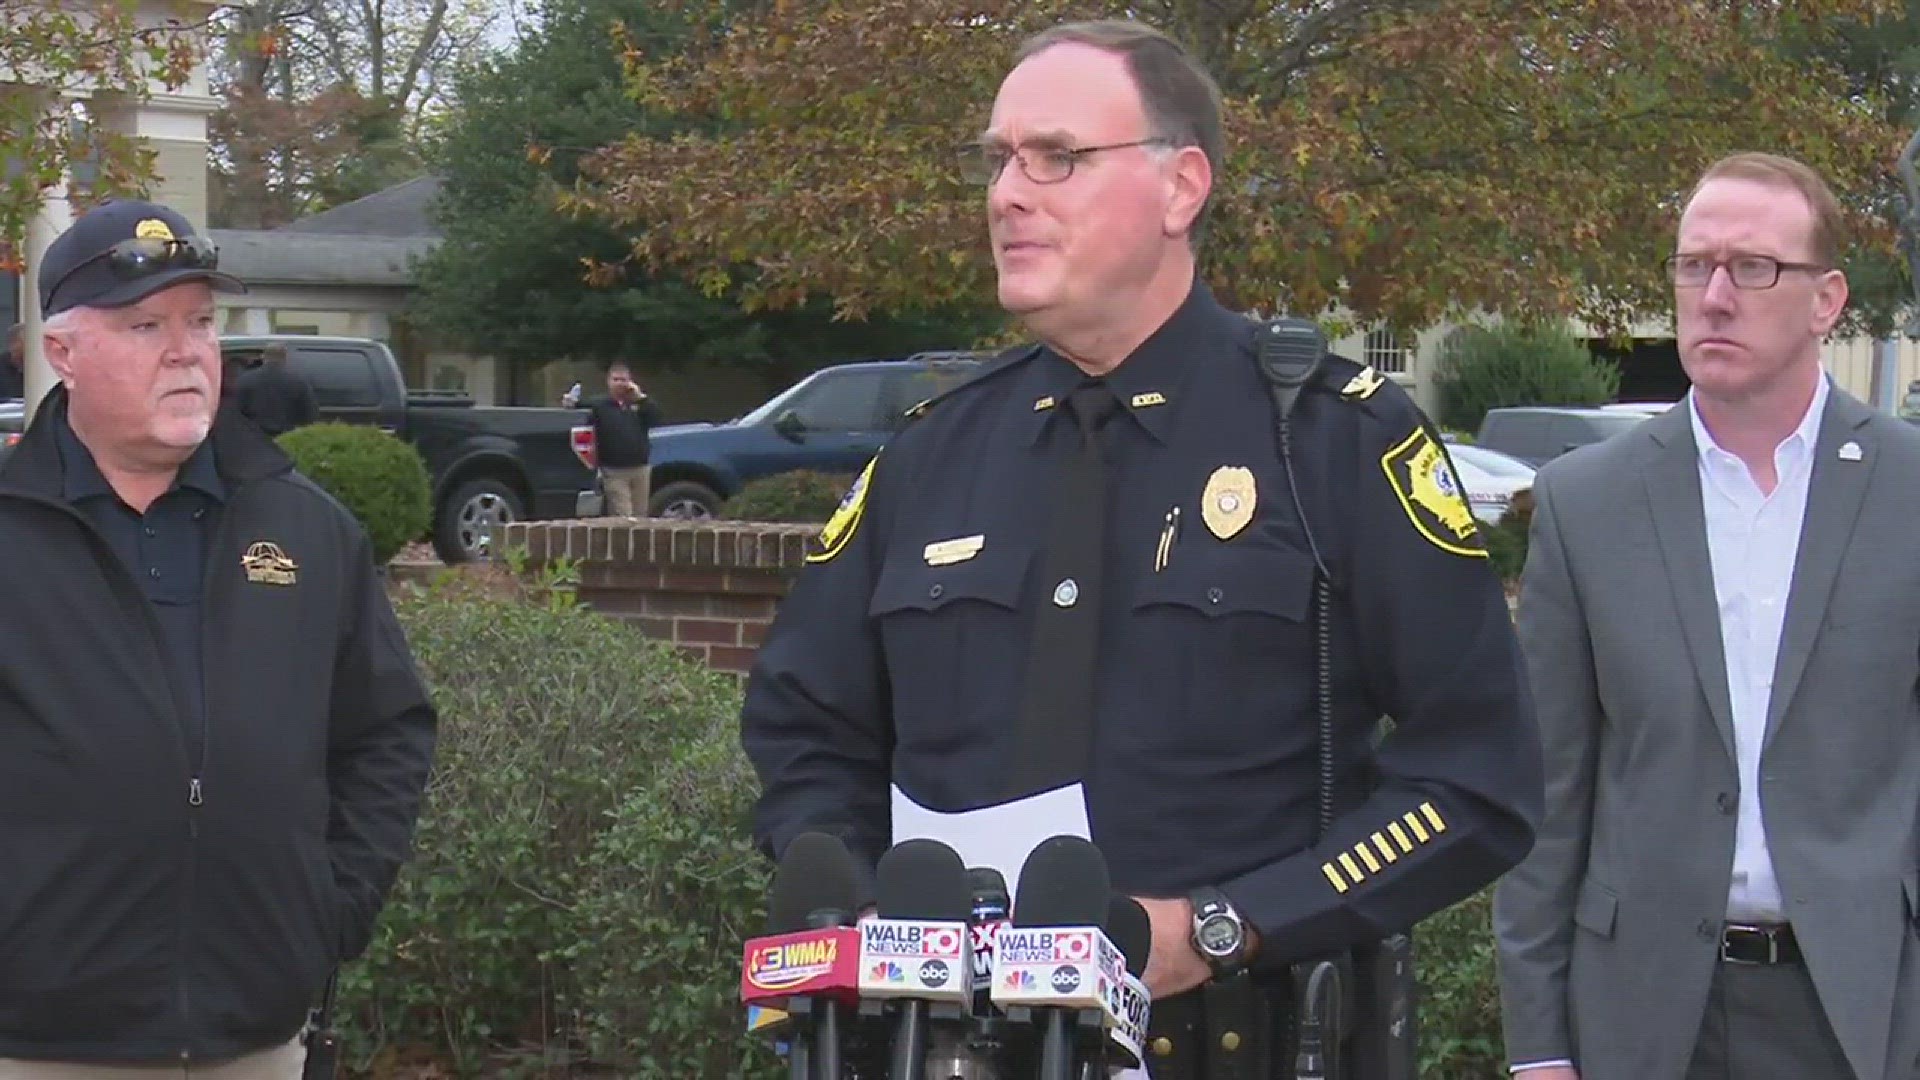 Americus police Chief Mark Scott gives an update on the fatal shooting of officer Nicholas Smarr on Wednesday. Another officer was hurt and the suspect is still at large. There is a $20,000 reward being officer for his capture.